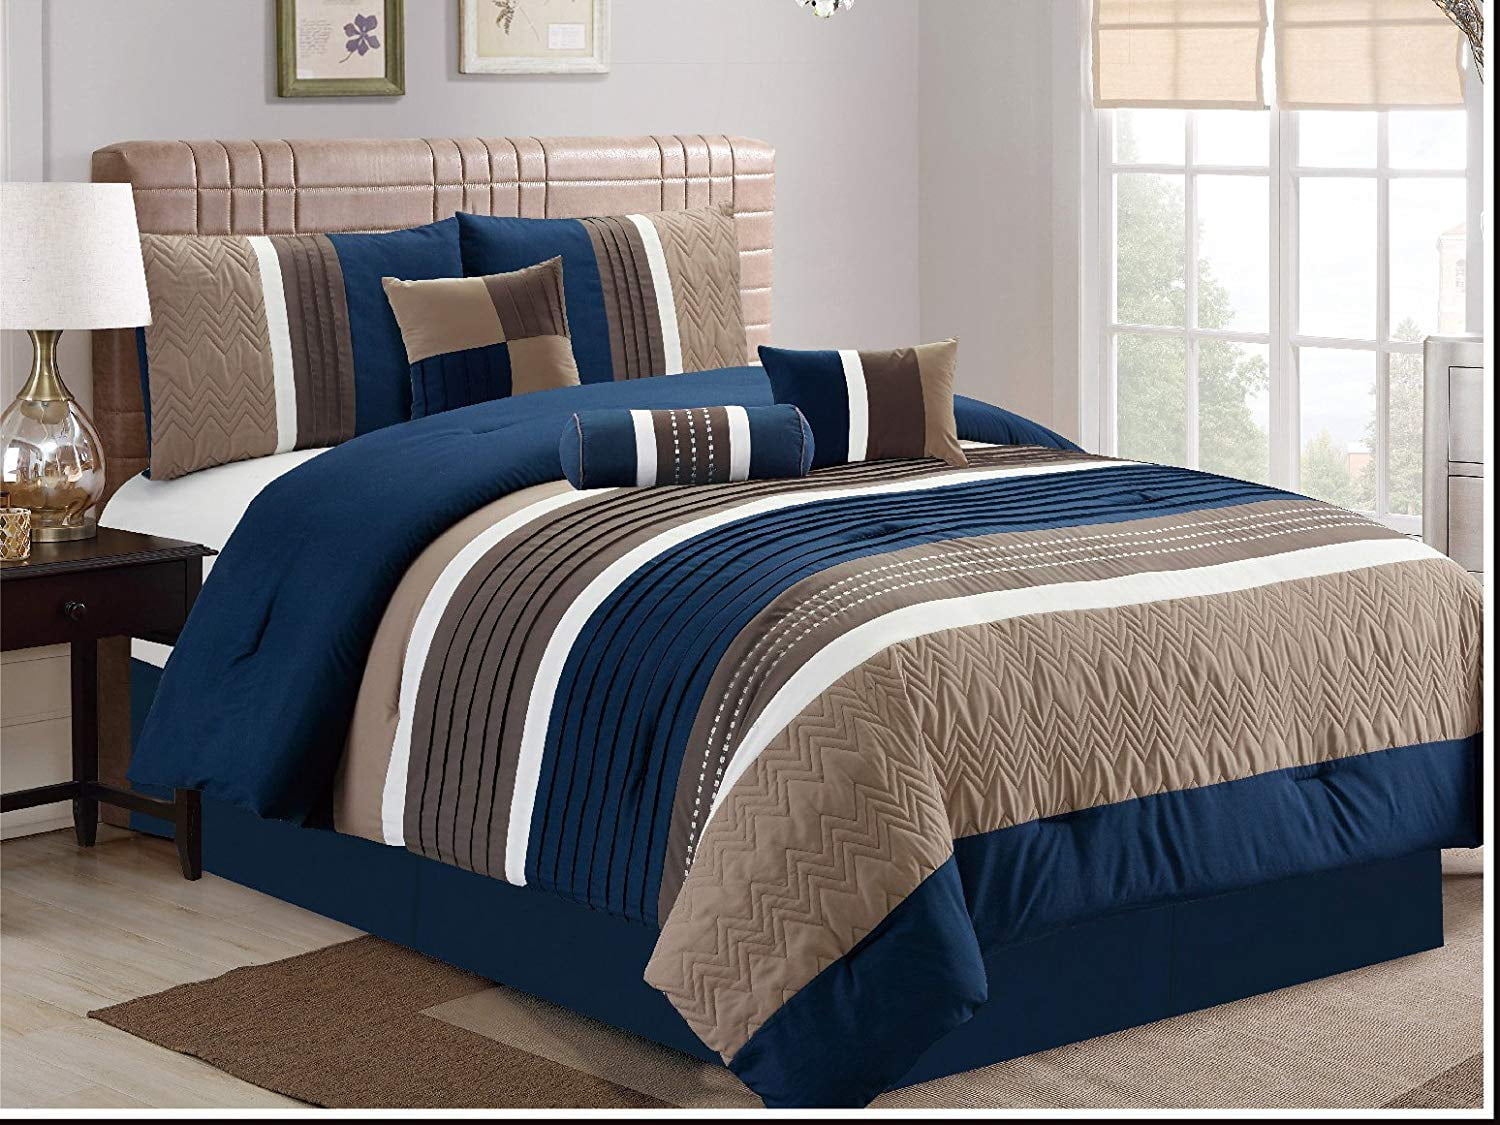 King Size 7 Pieces Luxury Embroidery Pattern Microfiber Comforter Set Navy Blue 